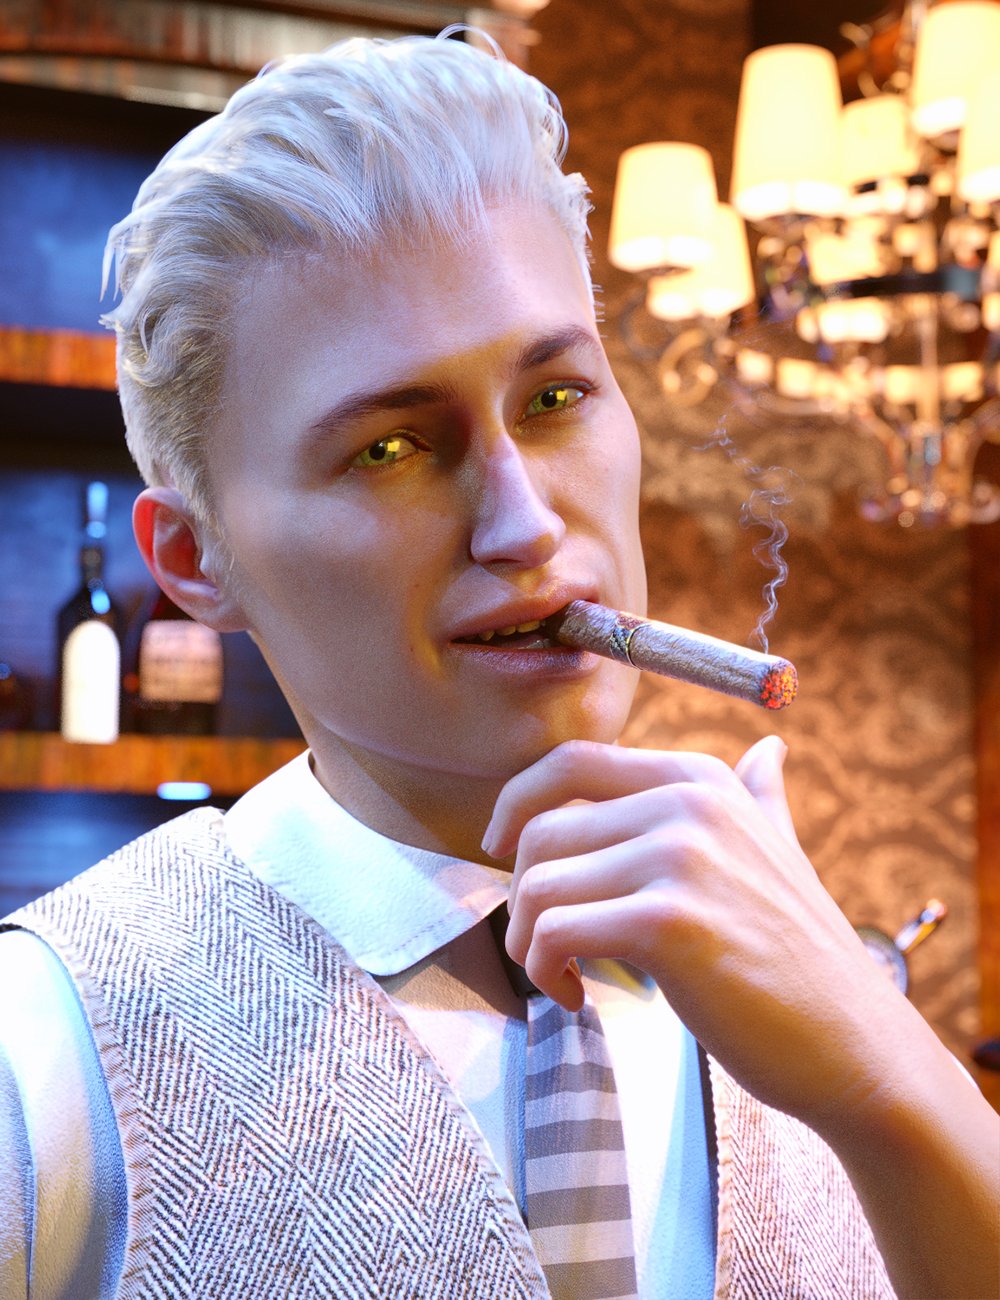 Smoking Paraphernalia - Cigar for Genesis 8 and 8.1 by: Sixus1 Media, 3D Models by Daz 3D